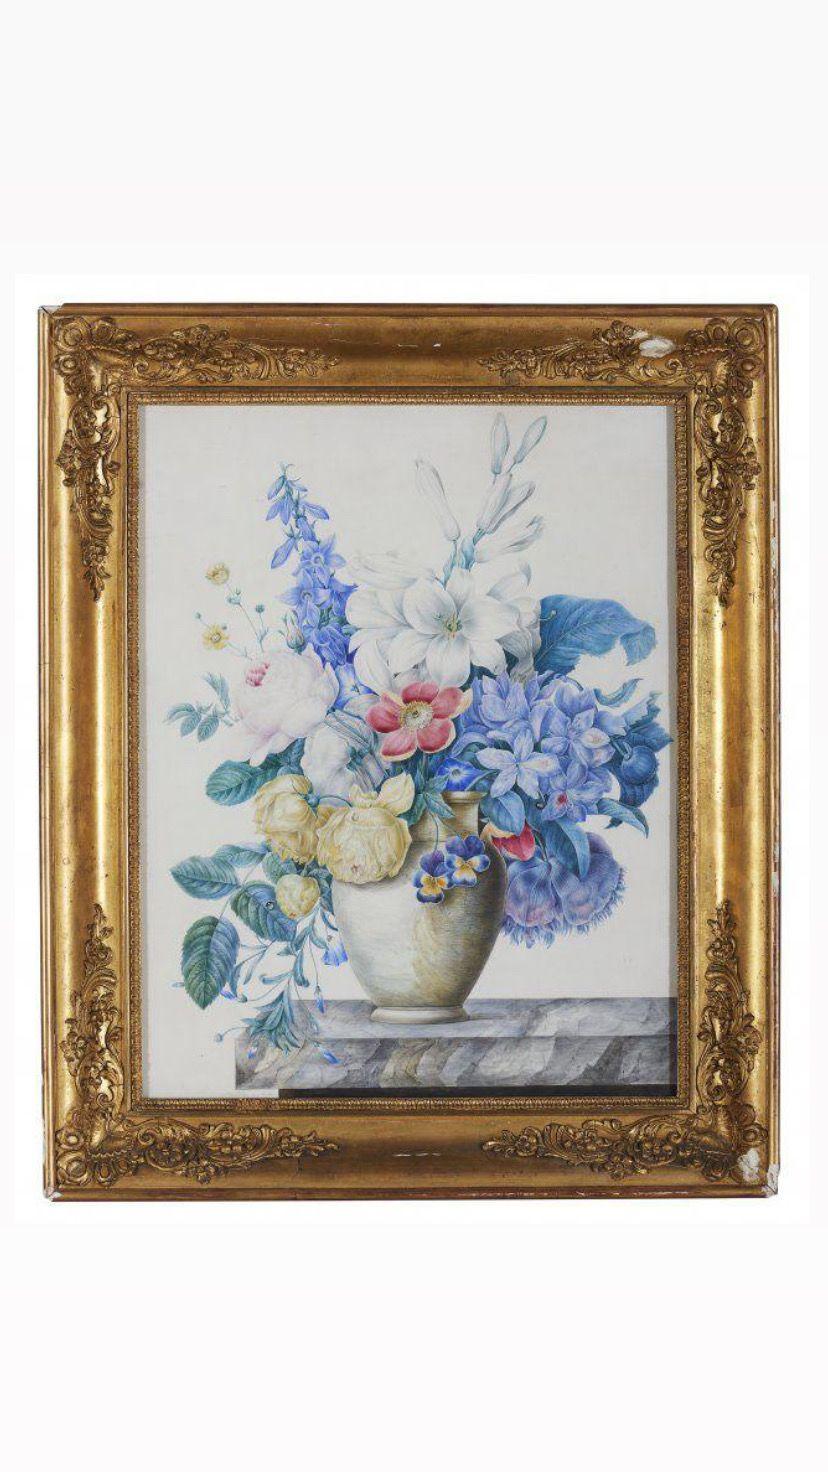 Watercolor paintings depicting flowers are a popular and beautiful form of art.

 This particular artist Marie-Louise-Anne-Victoire de la Fouchardière, used watercolors to capture the delicate and vibrant nature of flowers. The translucent and